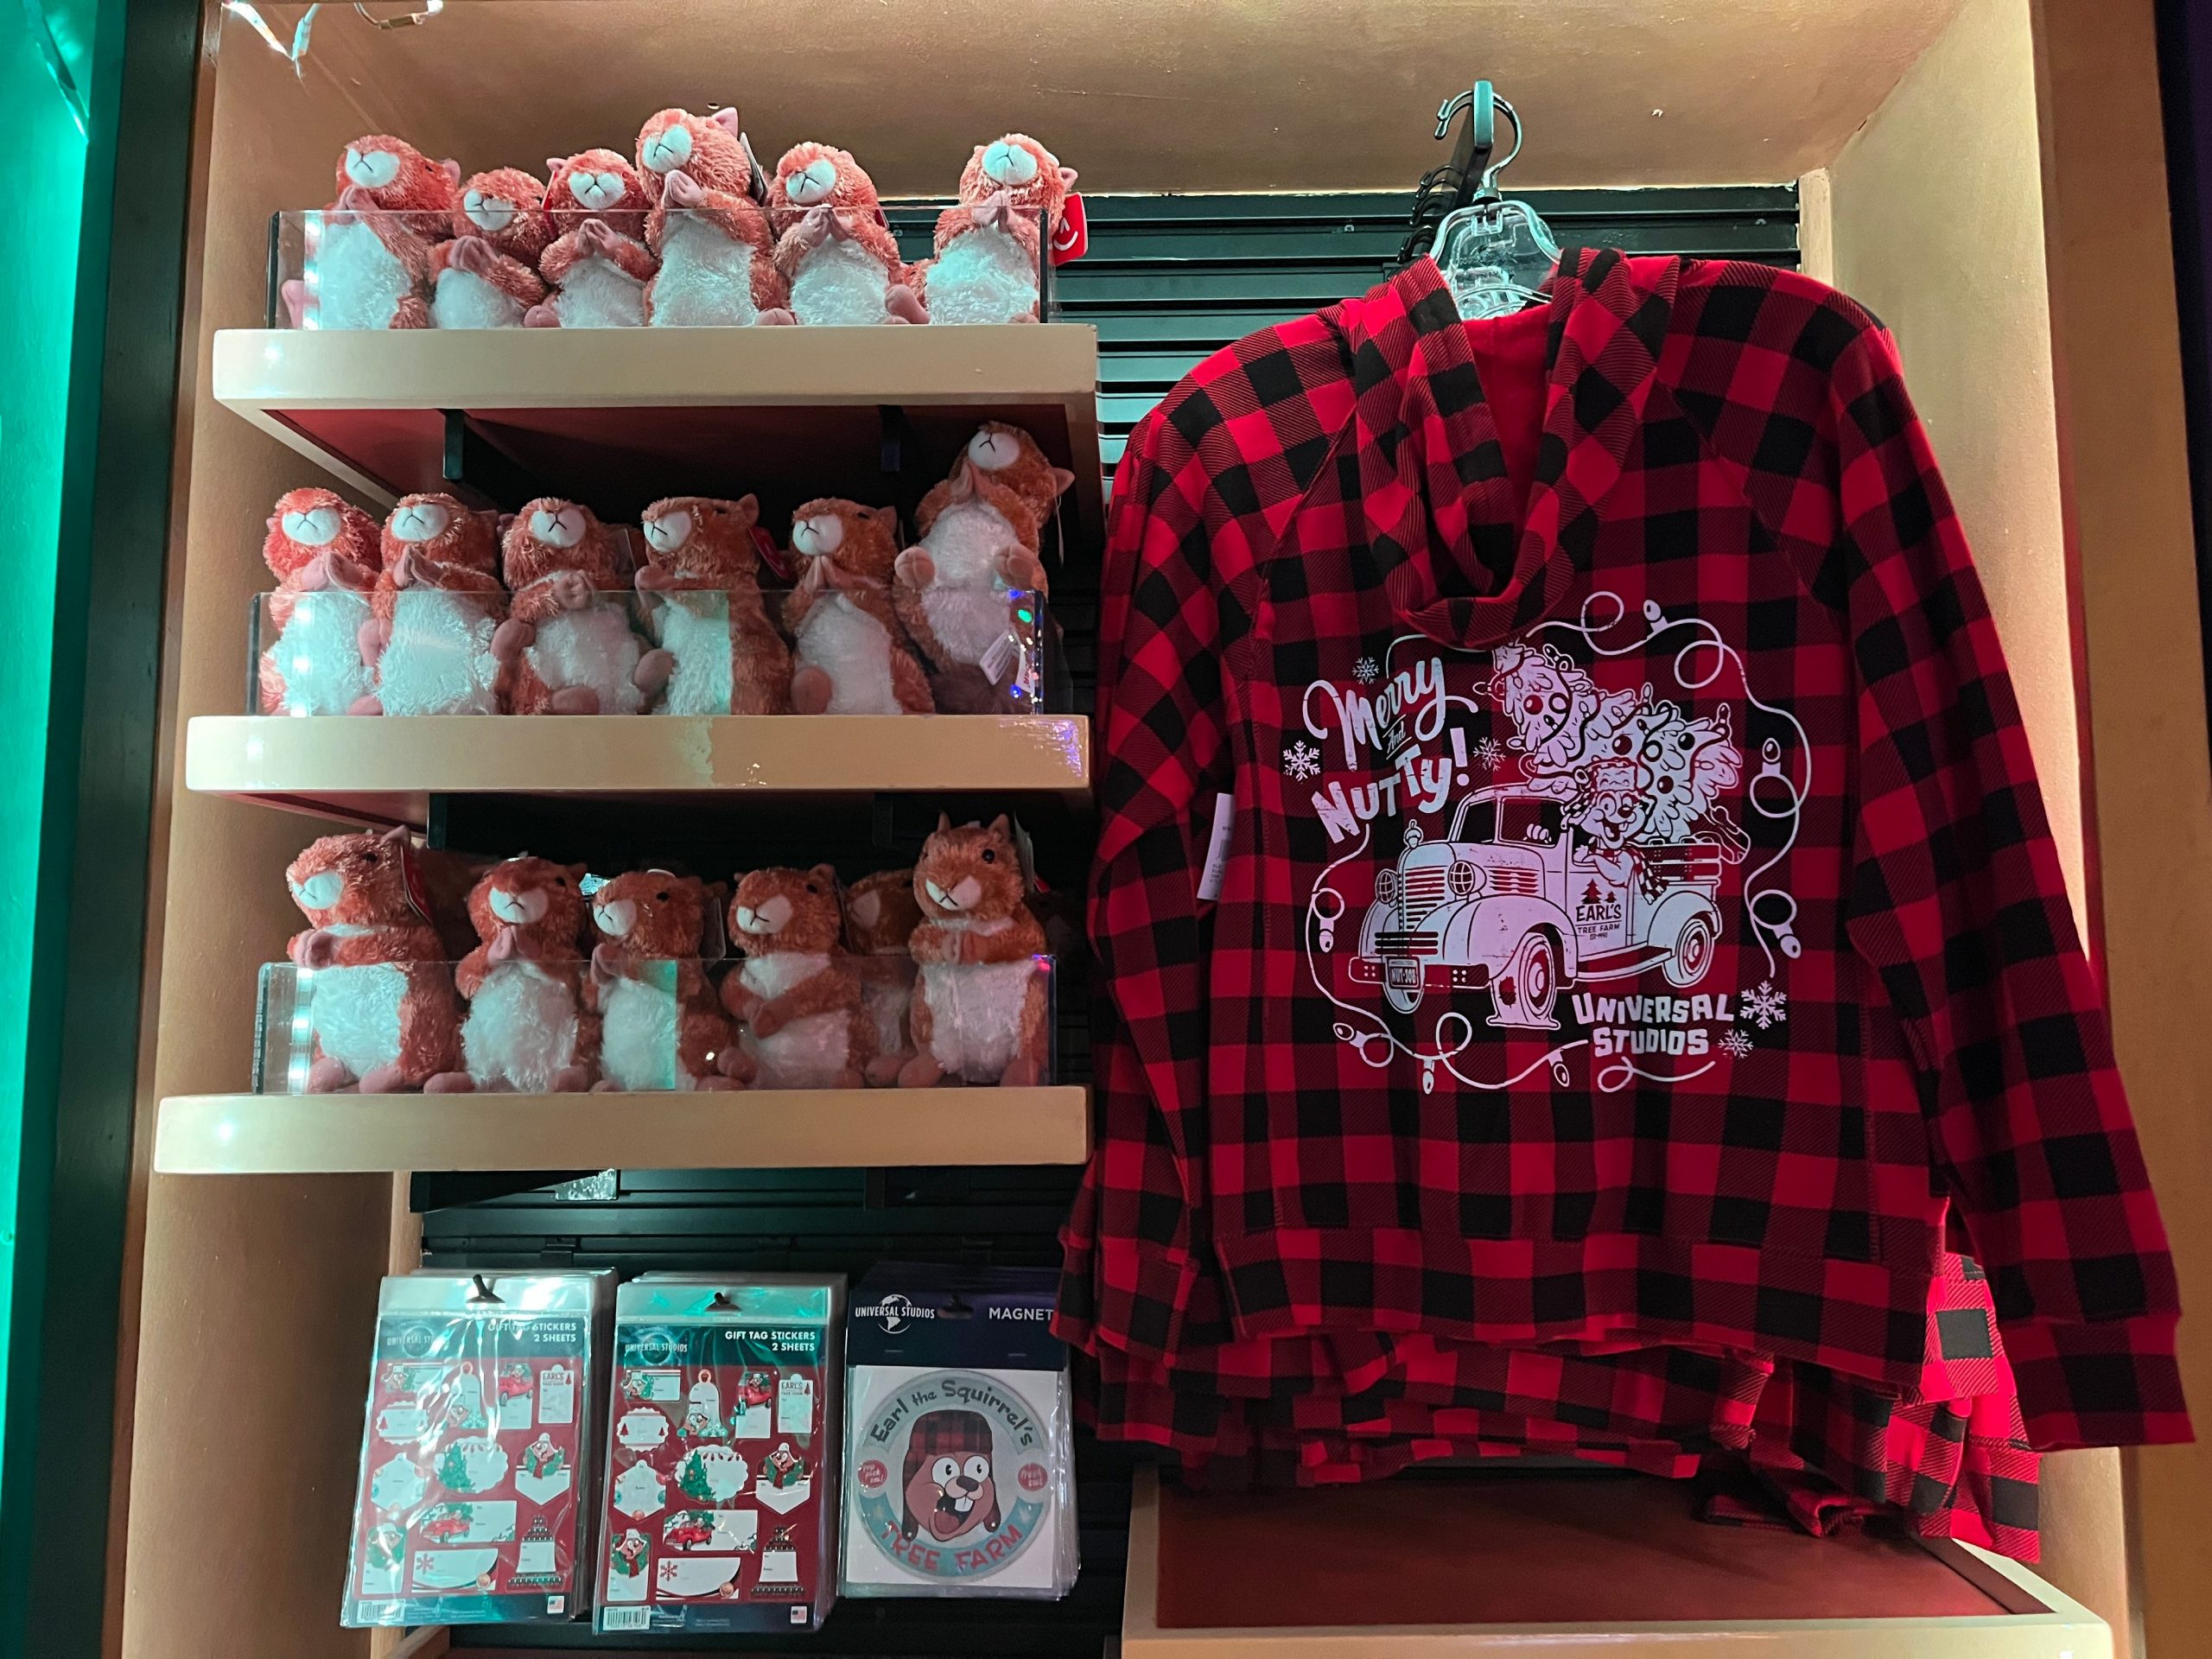 Earl the Squirrel's merchandise section, with timy squirrel figurines and a sweater.